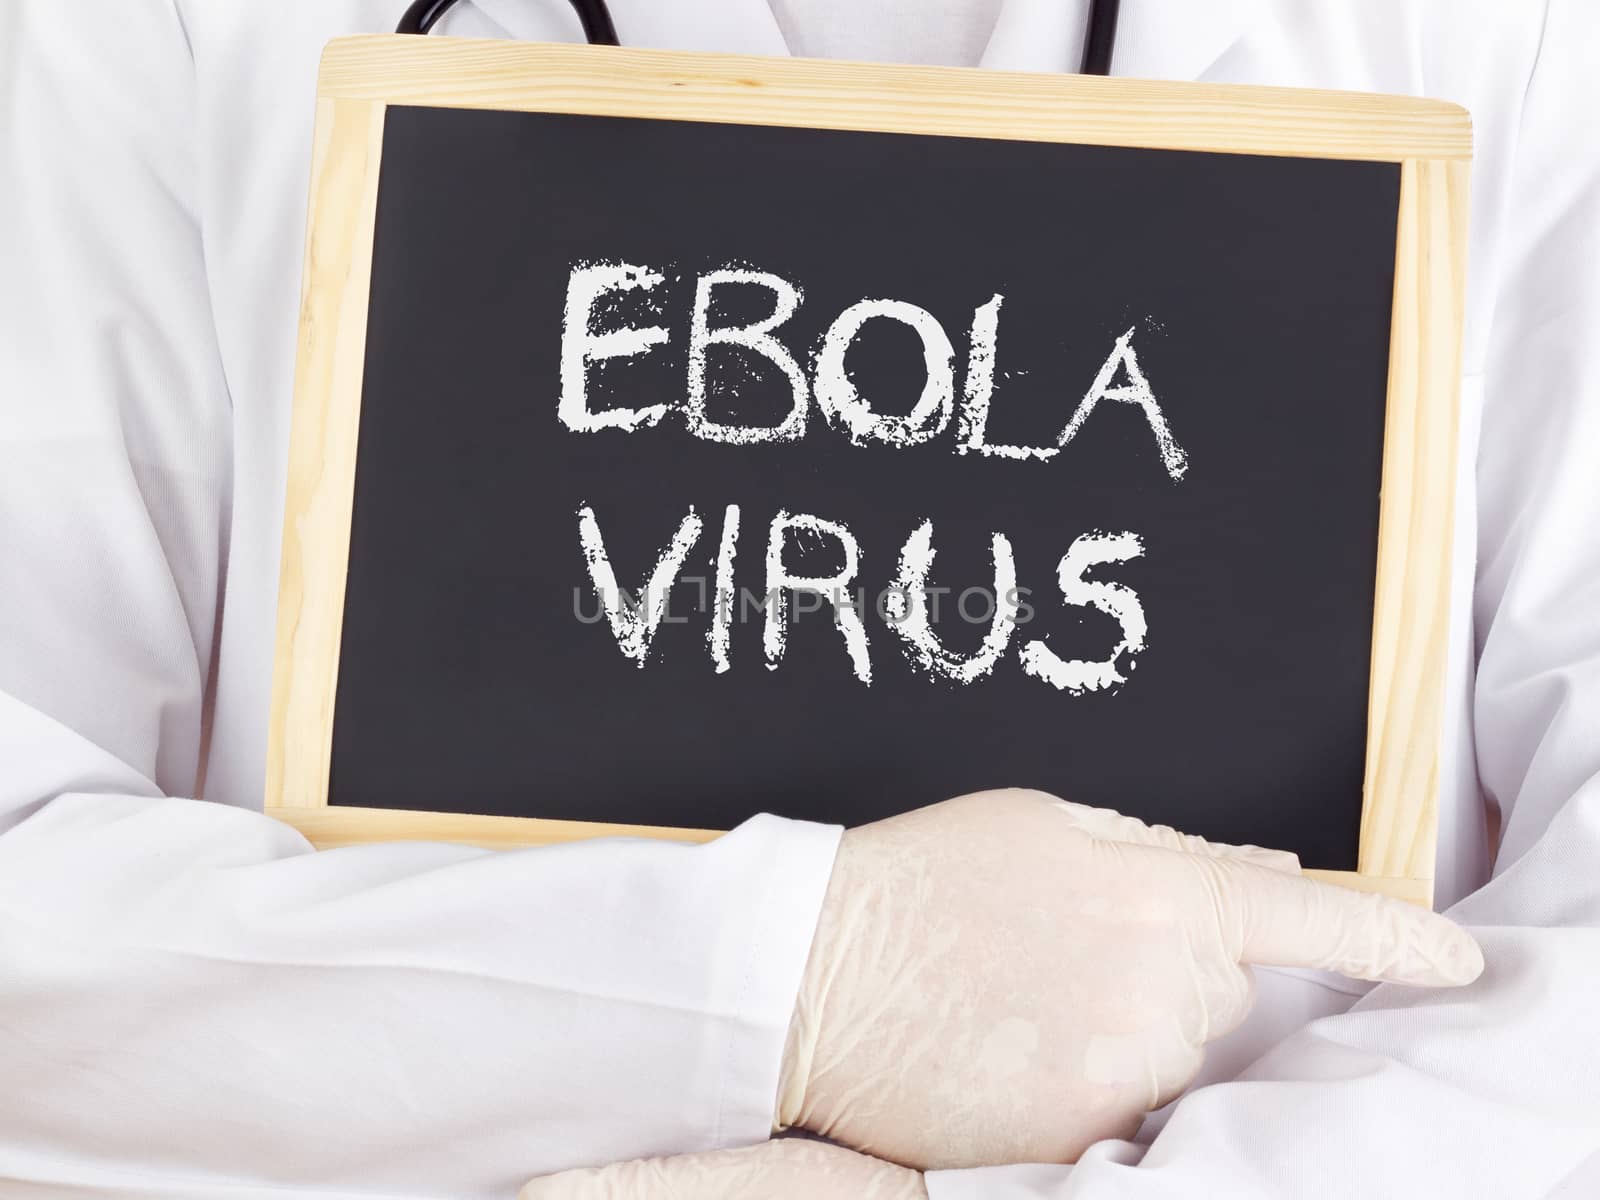 Doctor shows information: Ebolavirus by gwolters